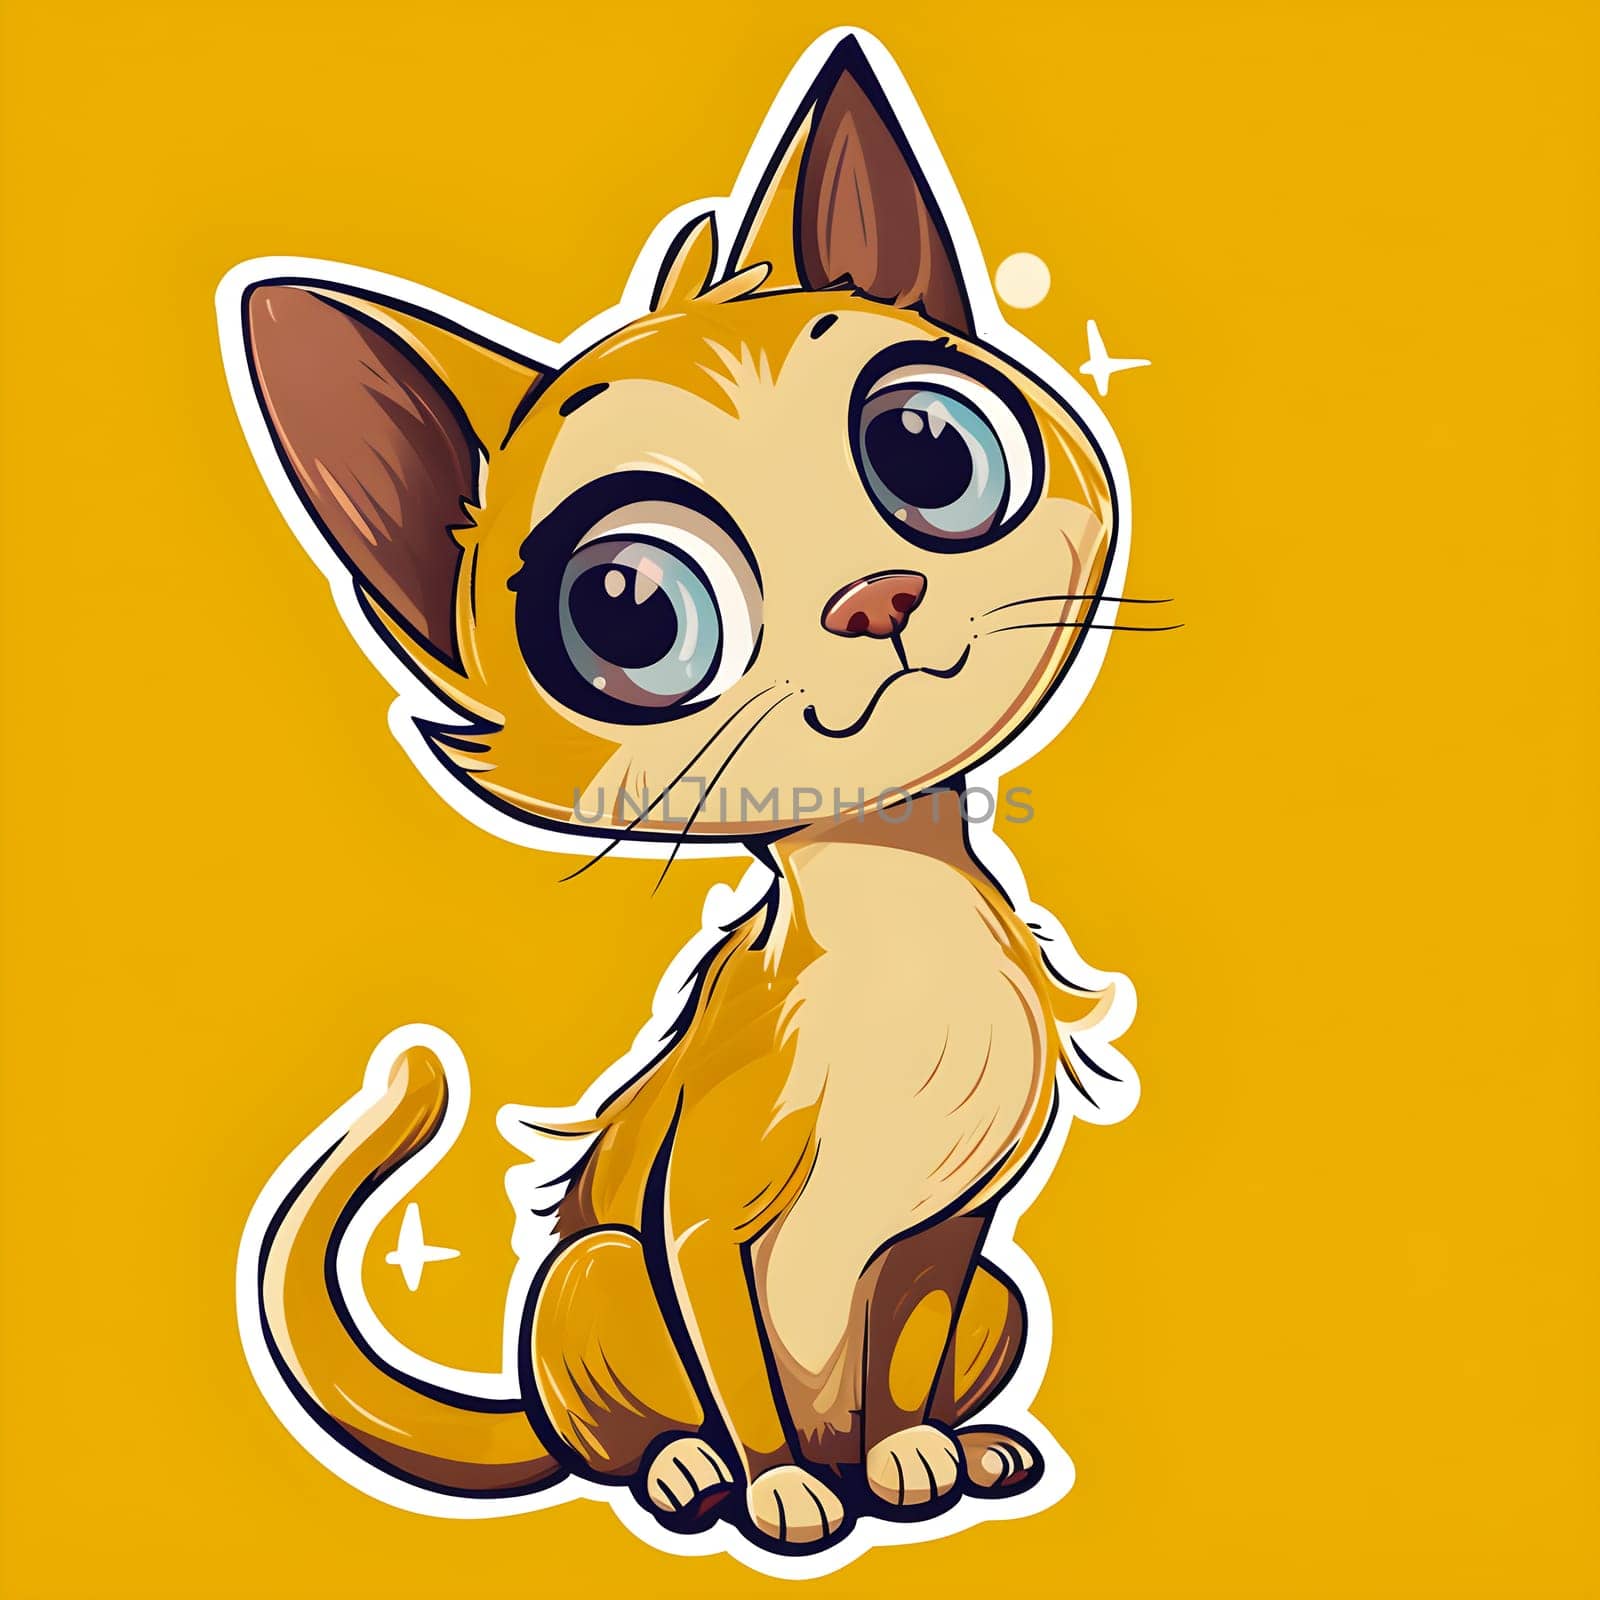 A captivating sticker featuring a wide-eyed cat that sparks wonder and invites imaginative adventures. by chrisroll